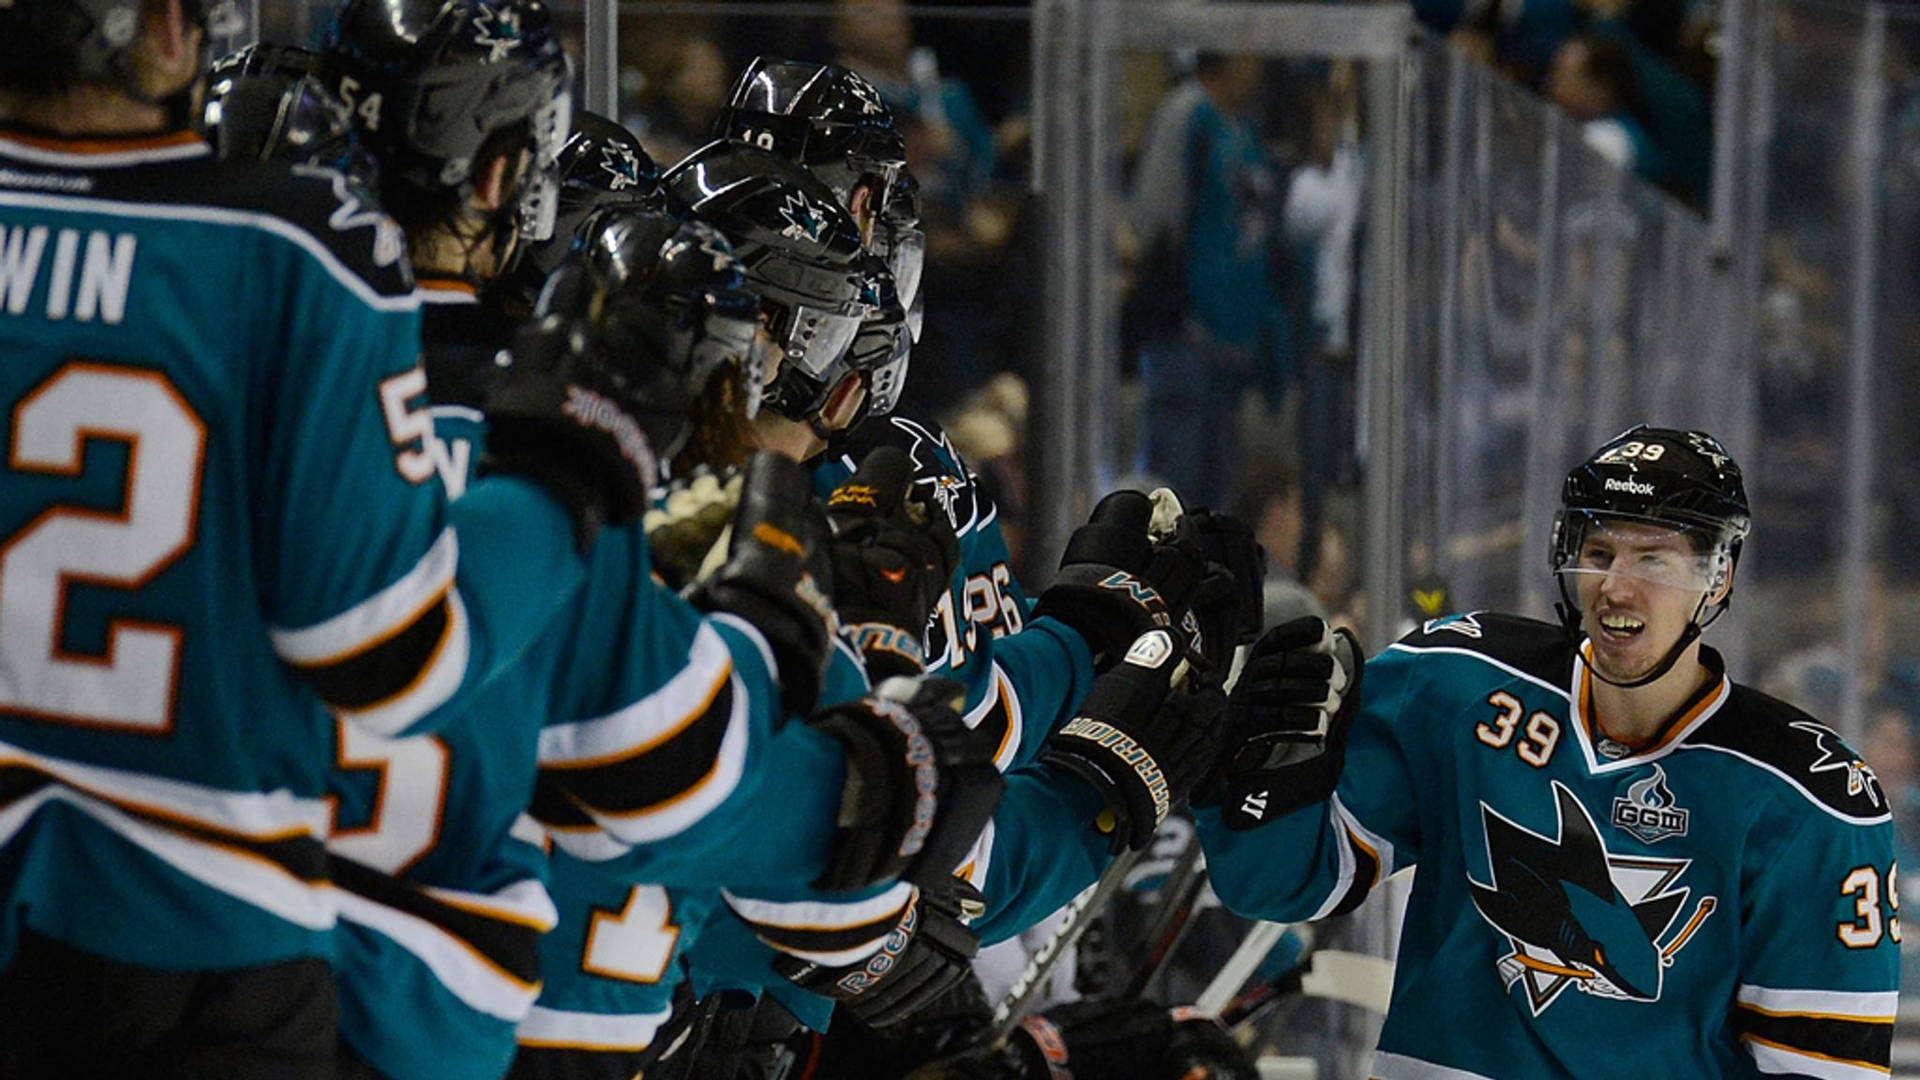 Logan Couture, professional ice hockey player, celebrating a great play with a fist bump to his teammates. Wallpaper